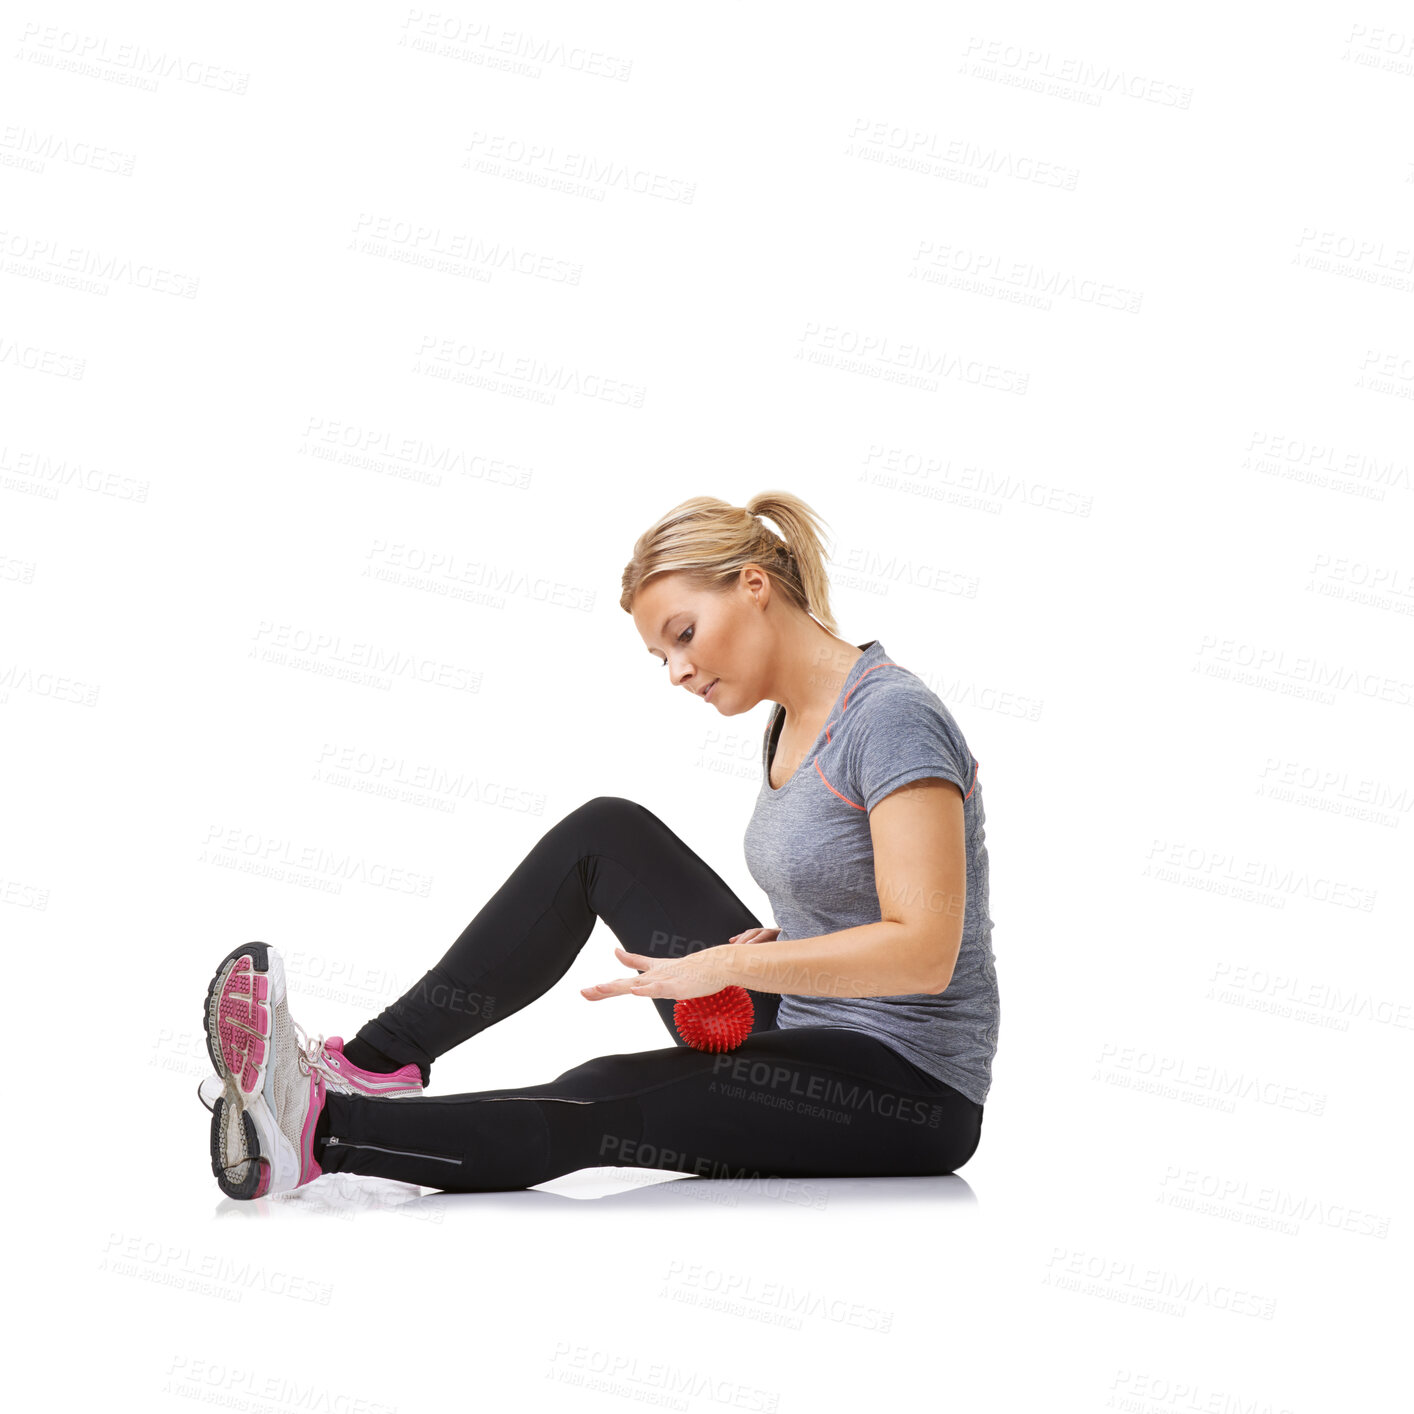 Buy stock photo A young woman getting in shape using an exercise ball